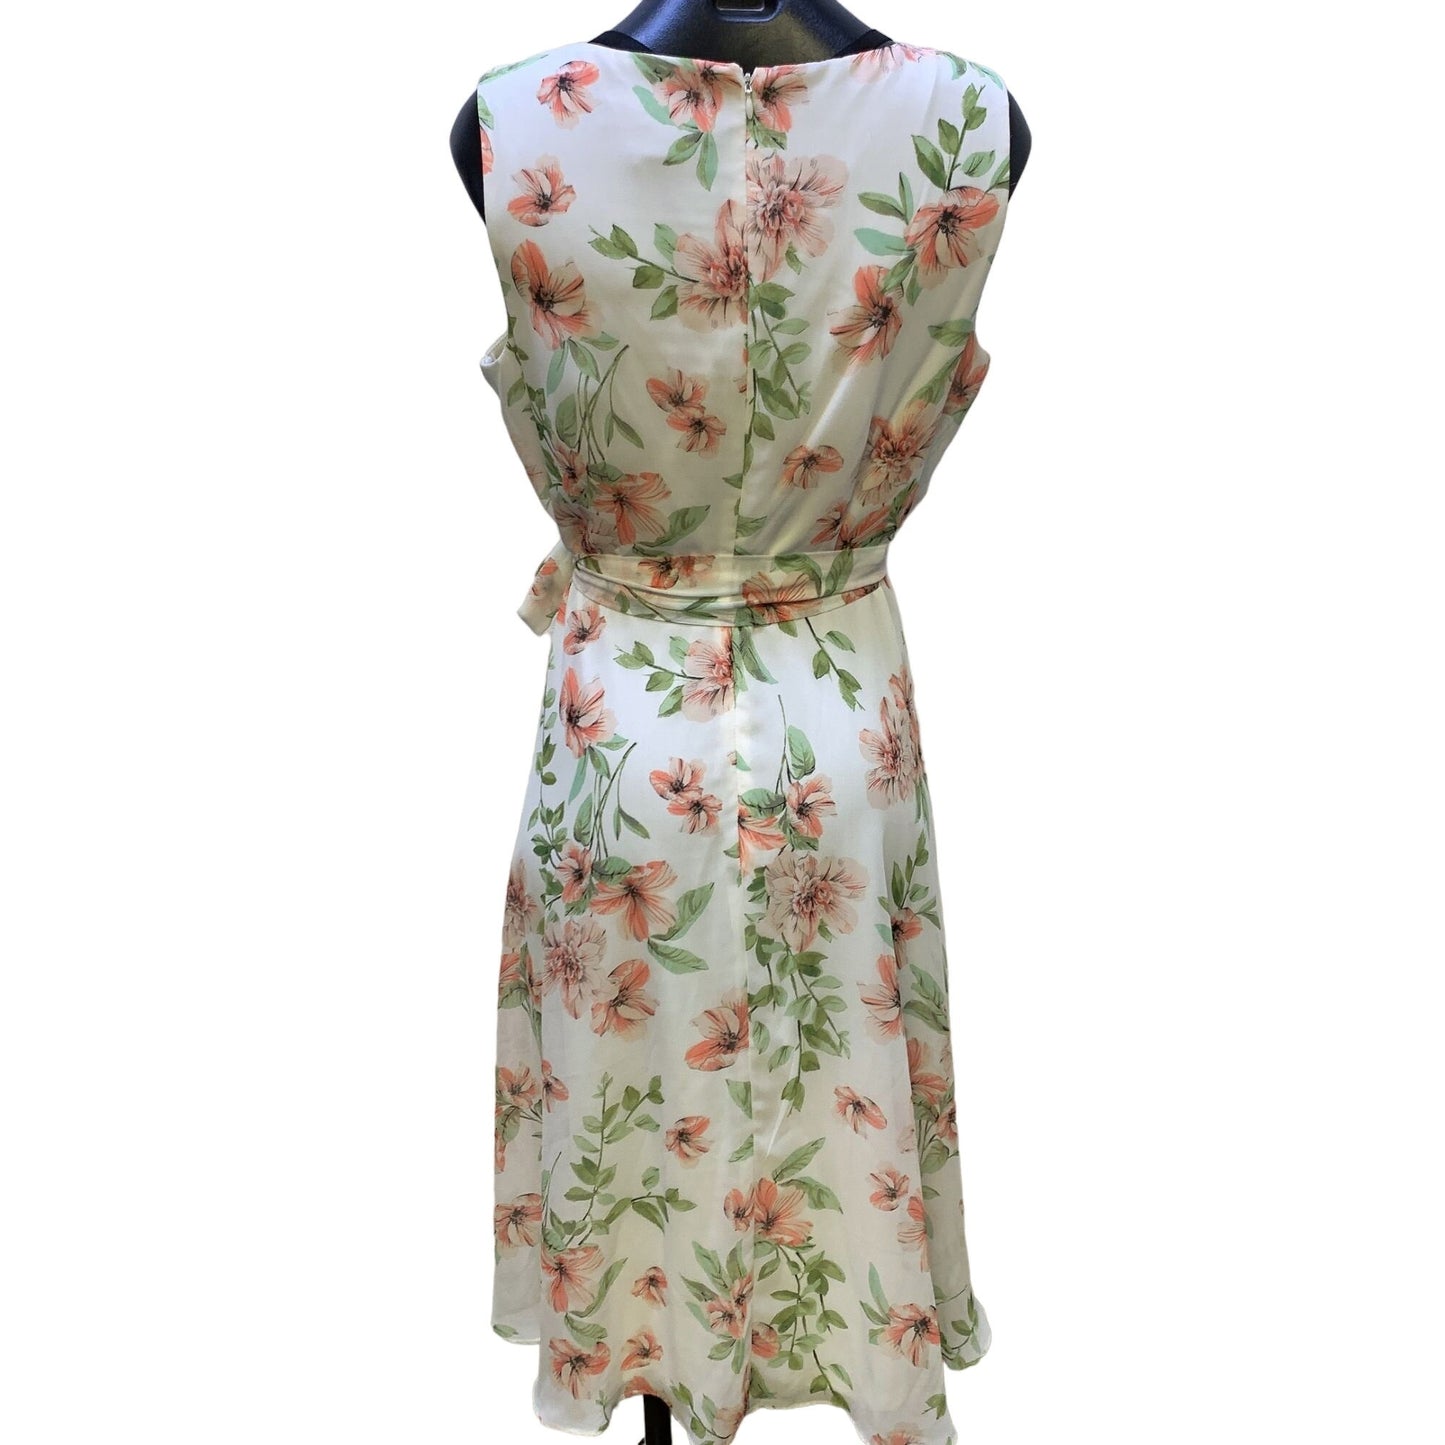 *Jessica Howard Ivory & Green Floral Print Dress Size 10P